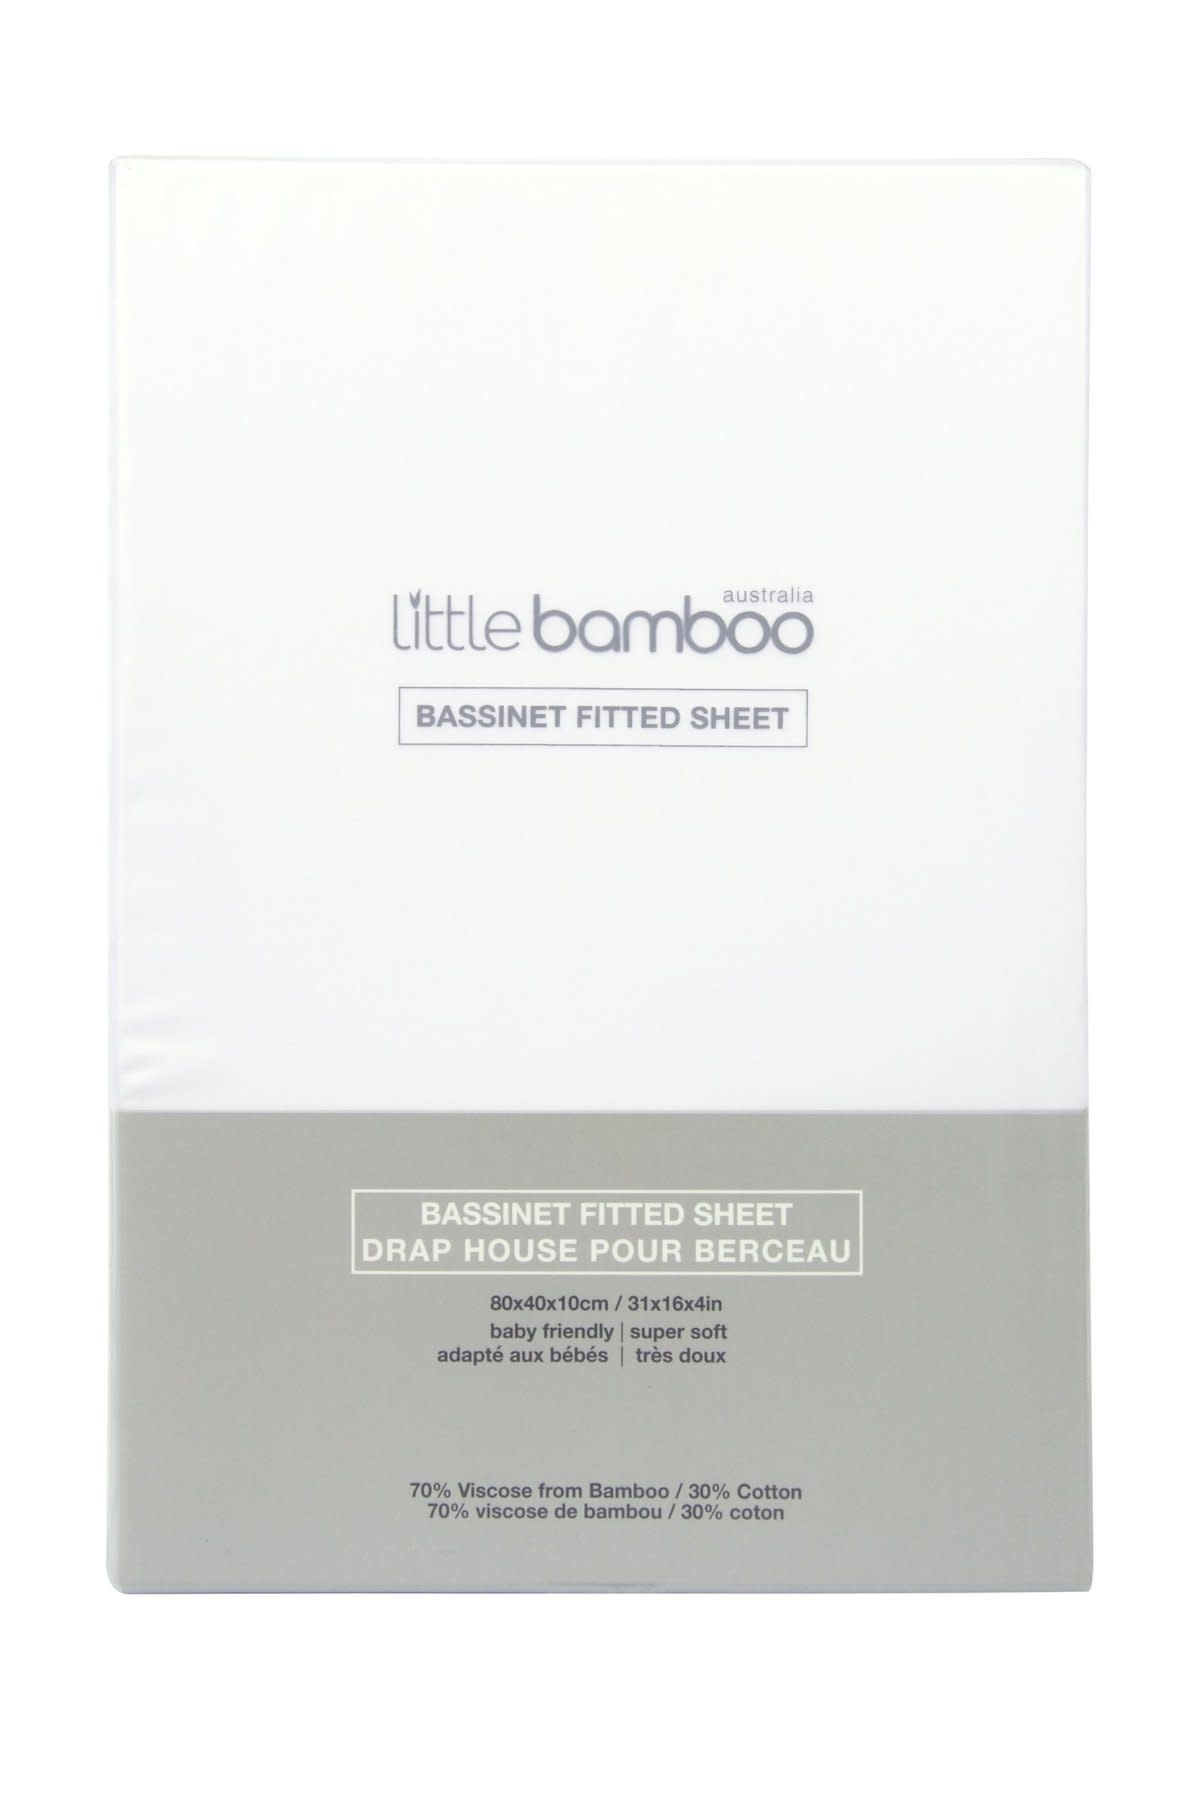 Little Bamboo Little Bamboo Bassinet Fitted Sheets - 80x40x10cm